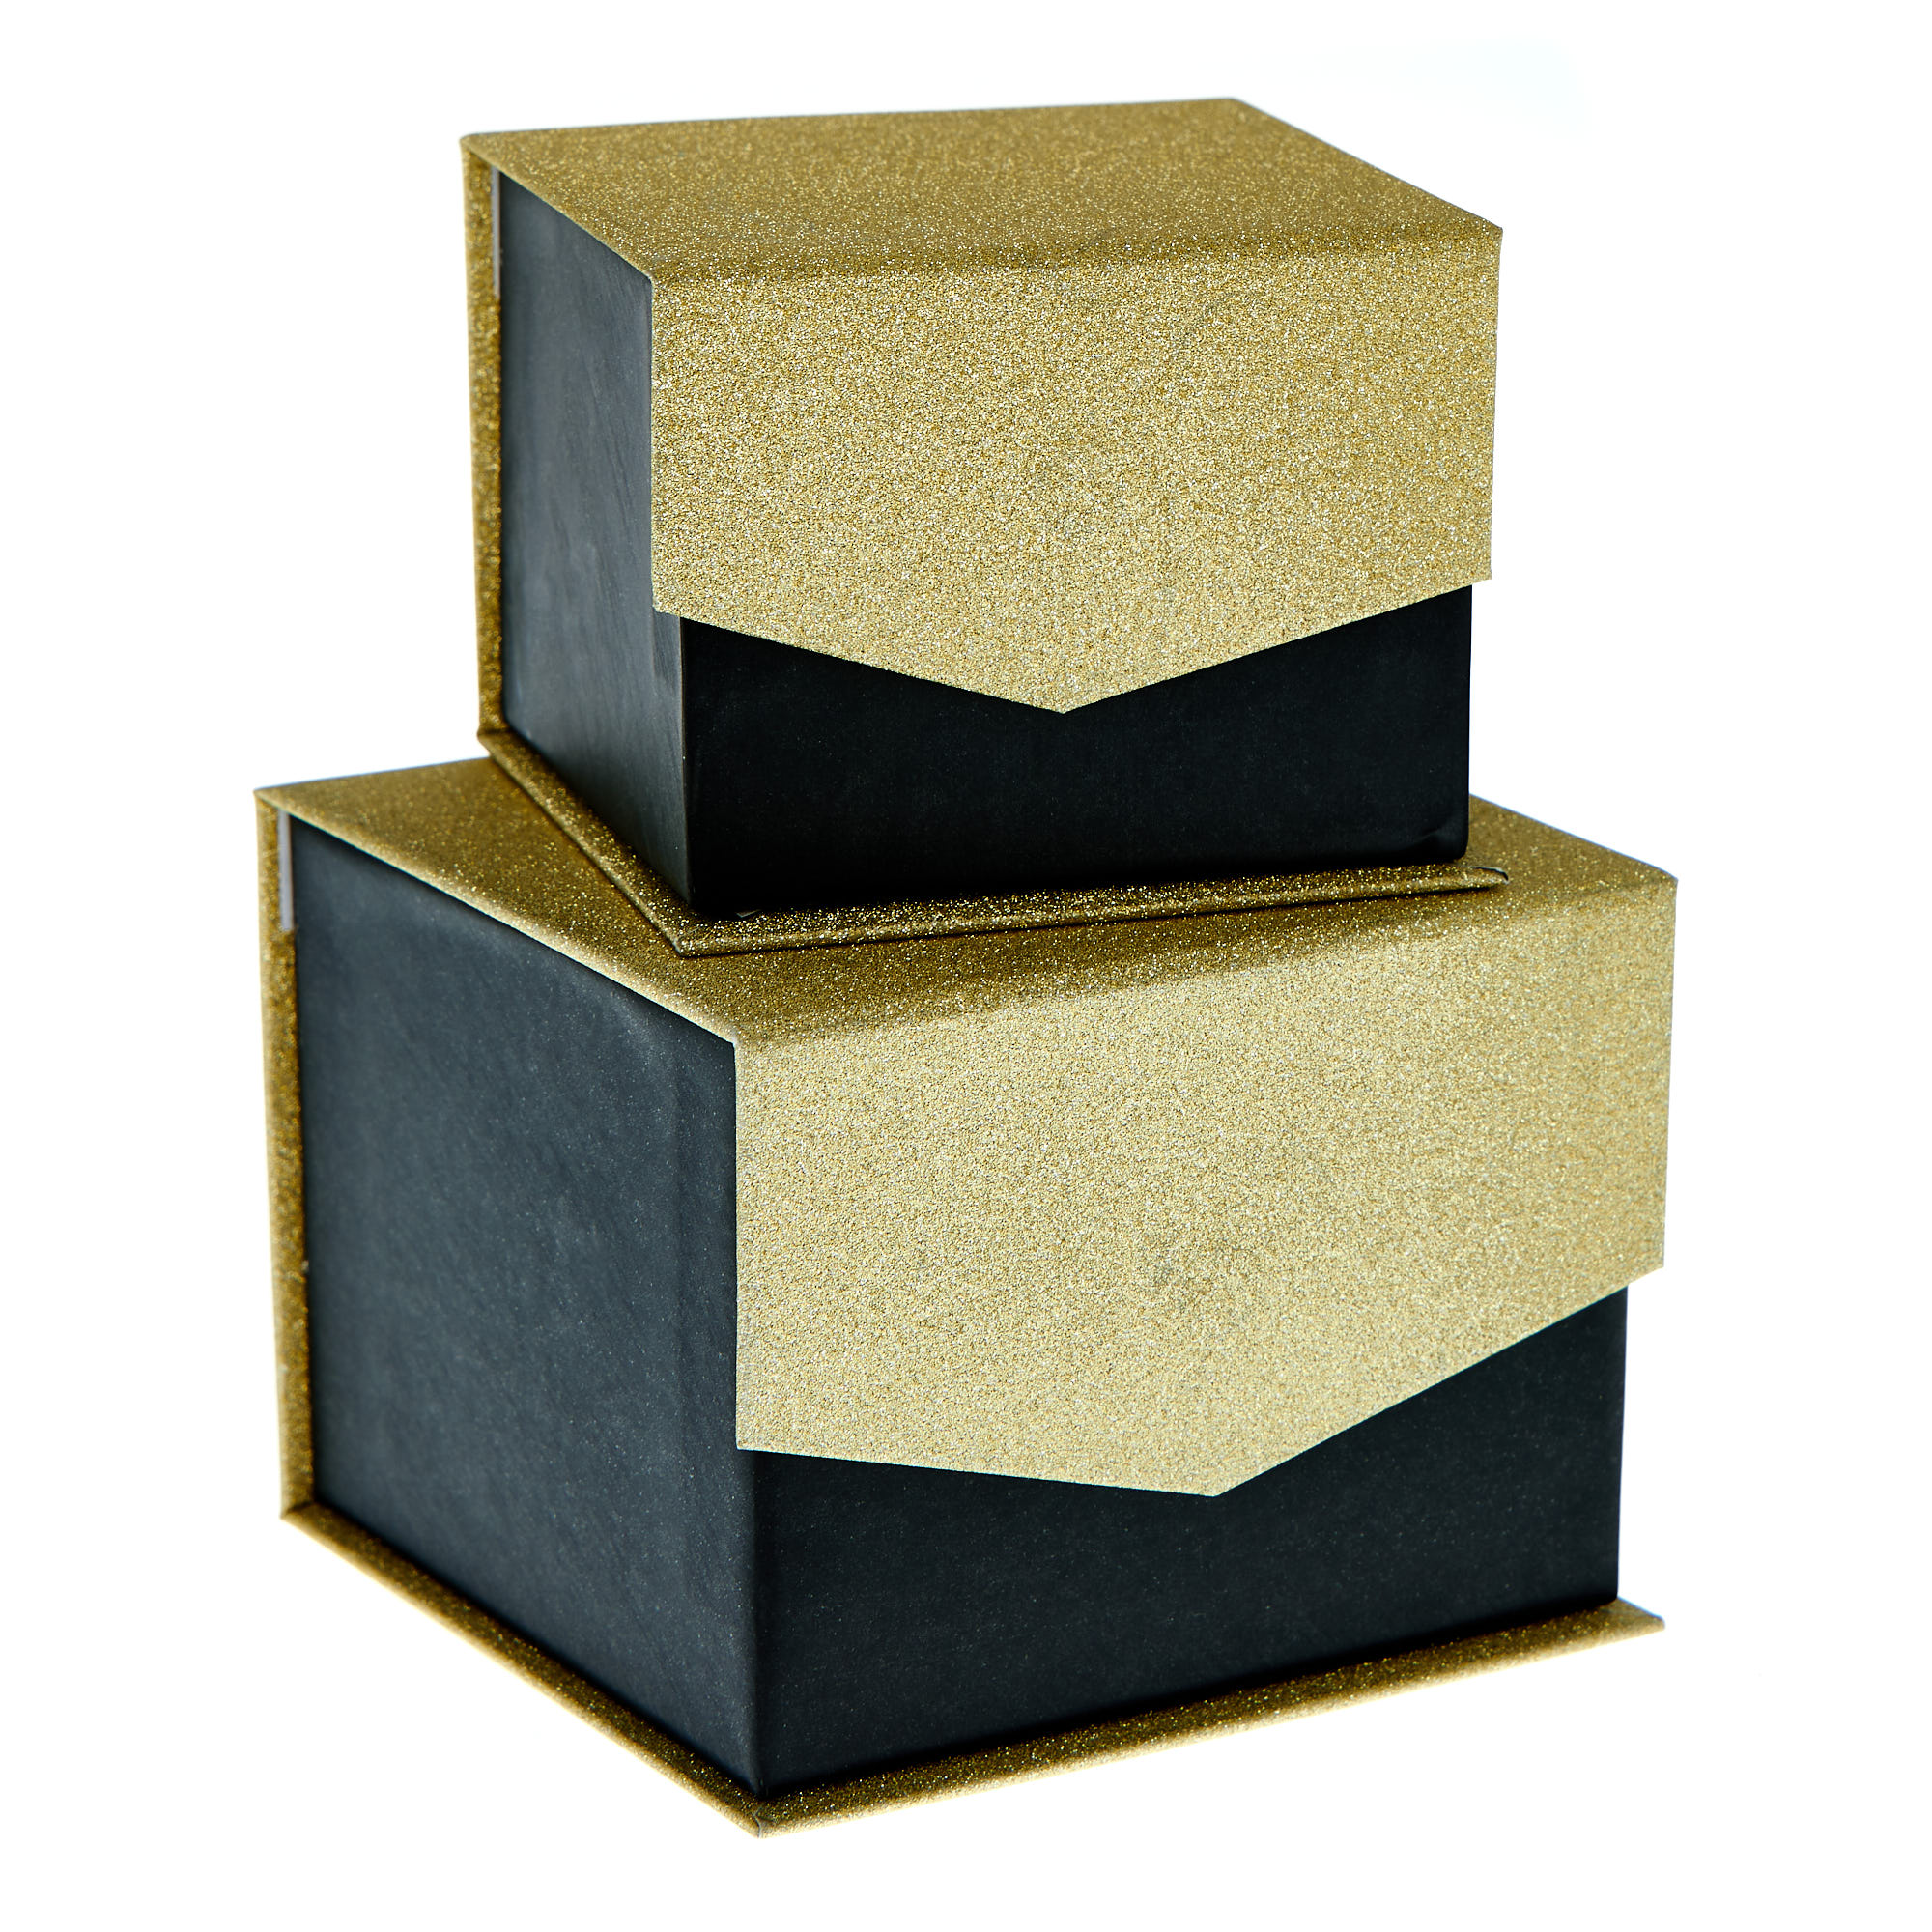 Black & Gold Jewellery Gift Boxes - Set Of 3